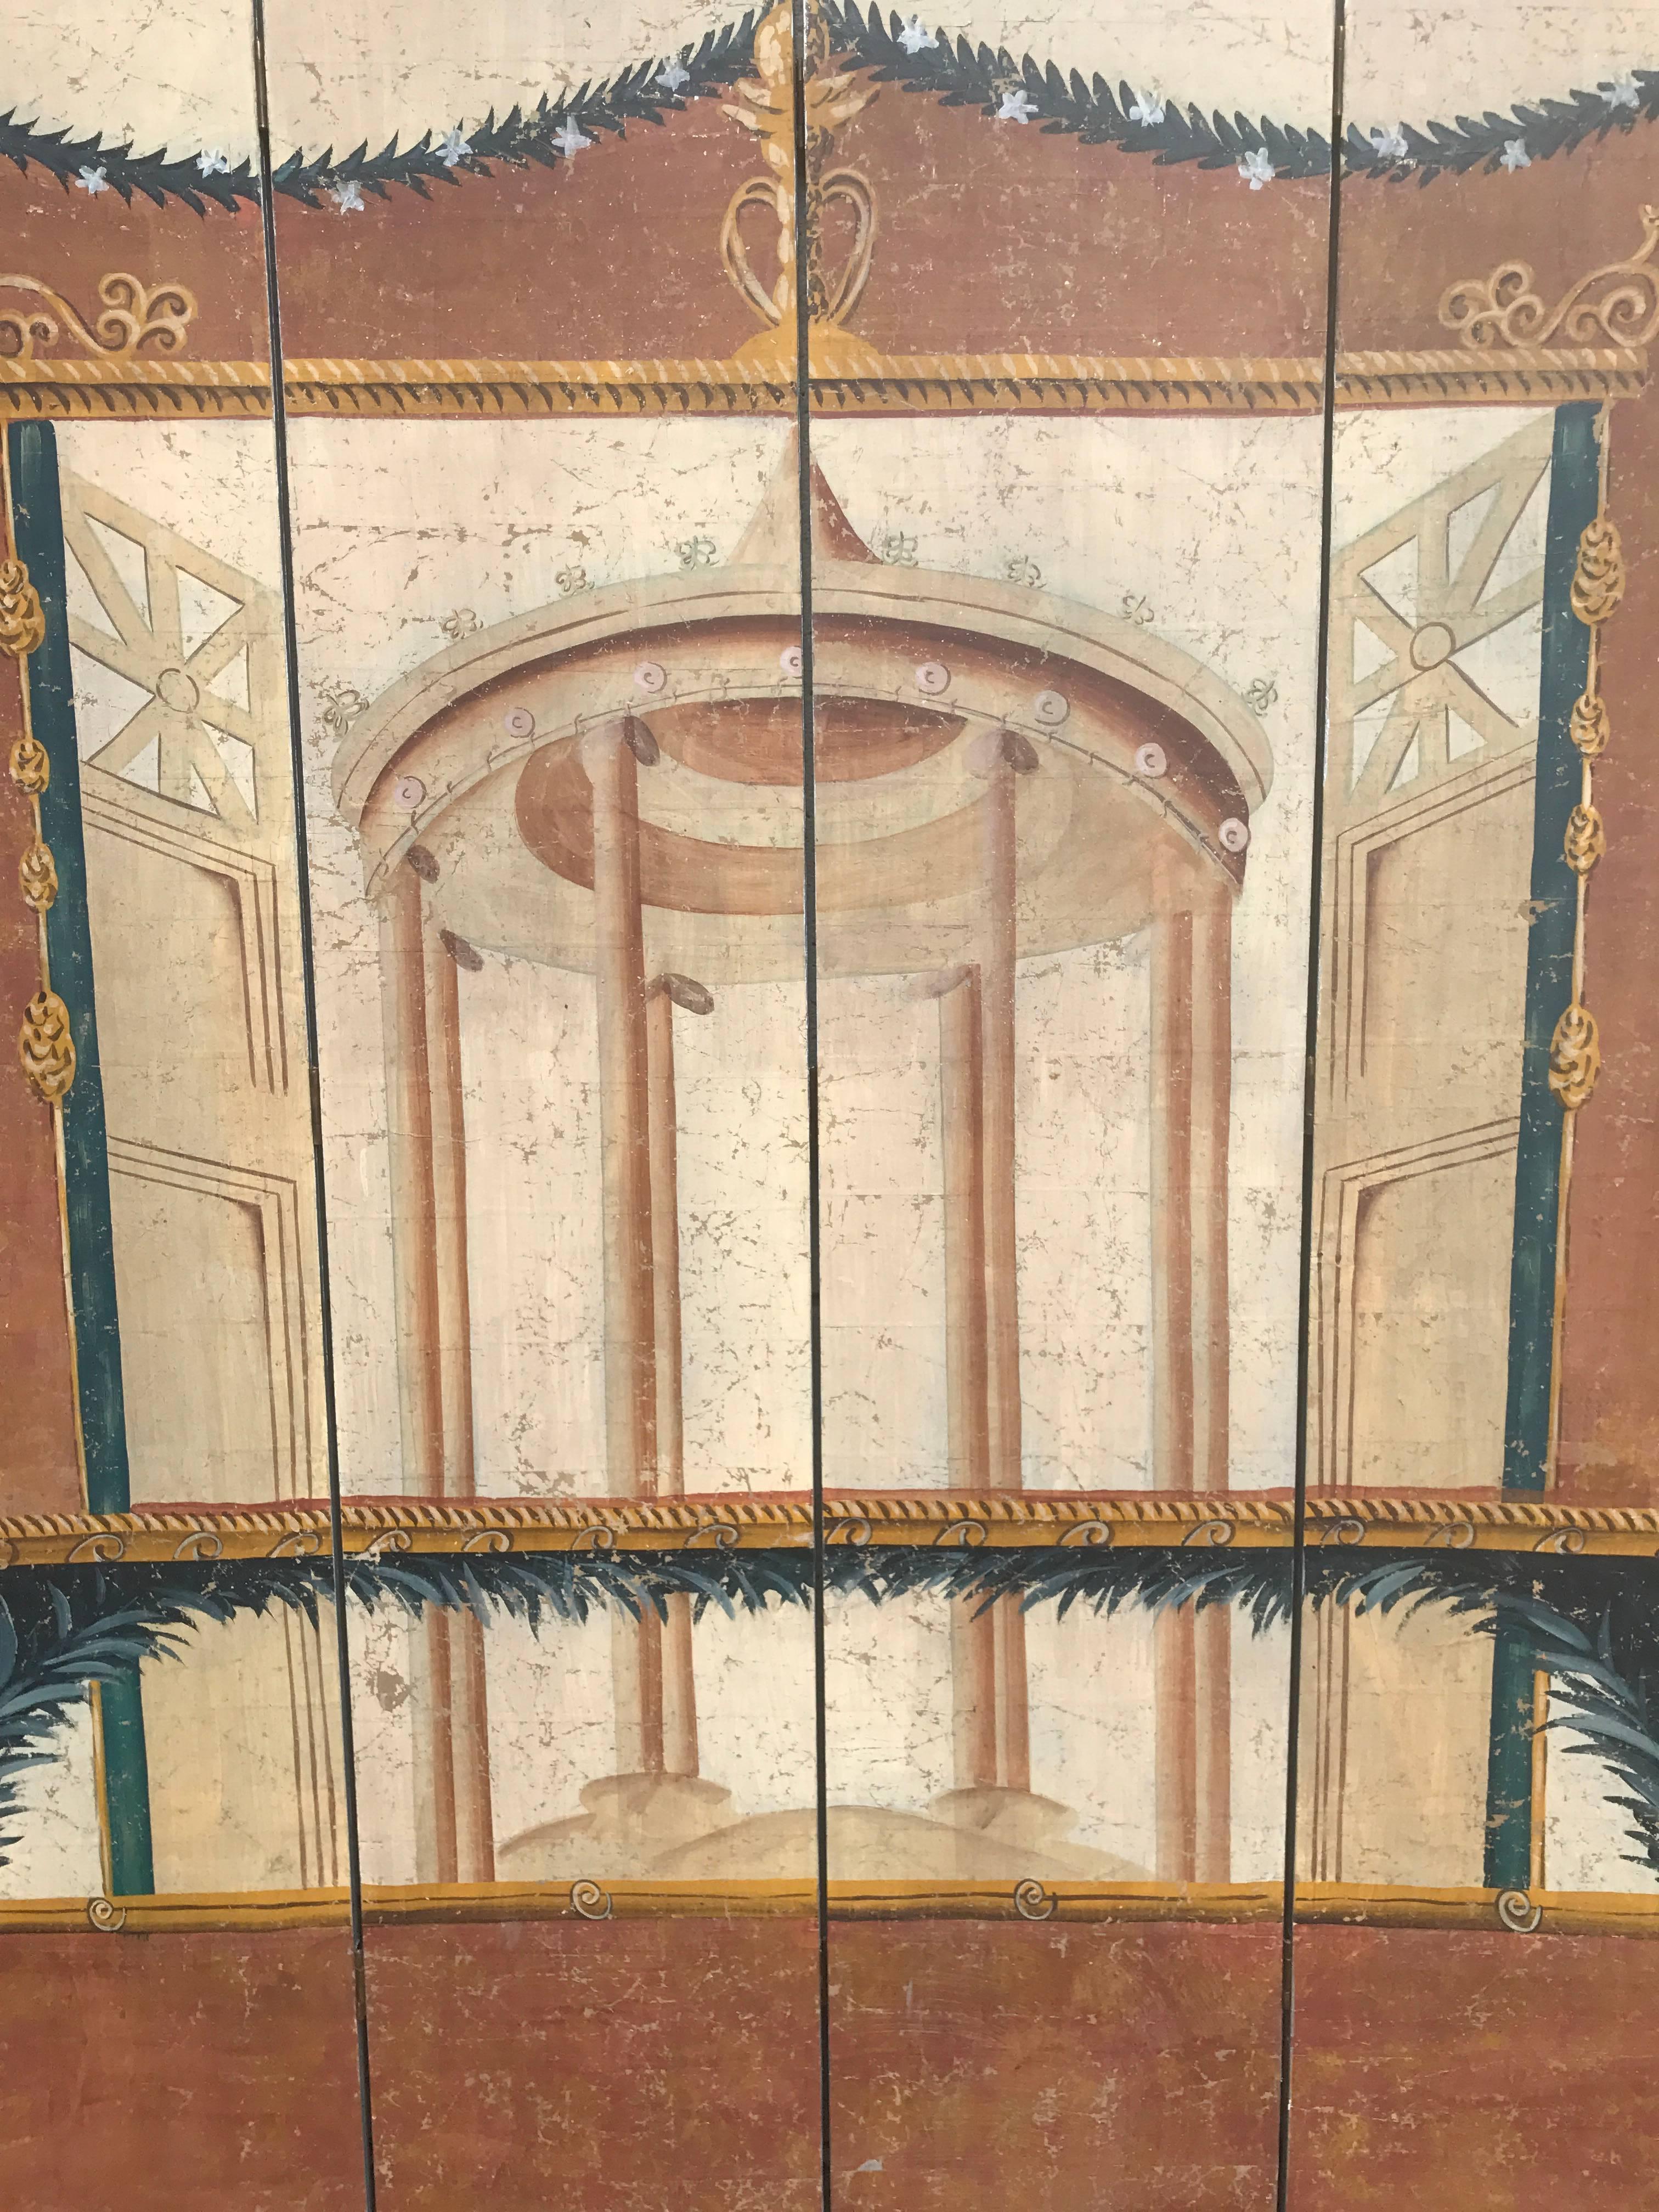 18th century Italian four-panel painted wallpaper made into a screen depicting a Roman rotunda or temple structure in the style and coloring of the frescos found at Pompeii. A great room divider and also makes a wonderful large decorative painting